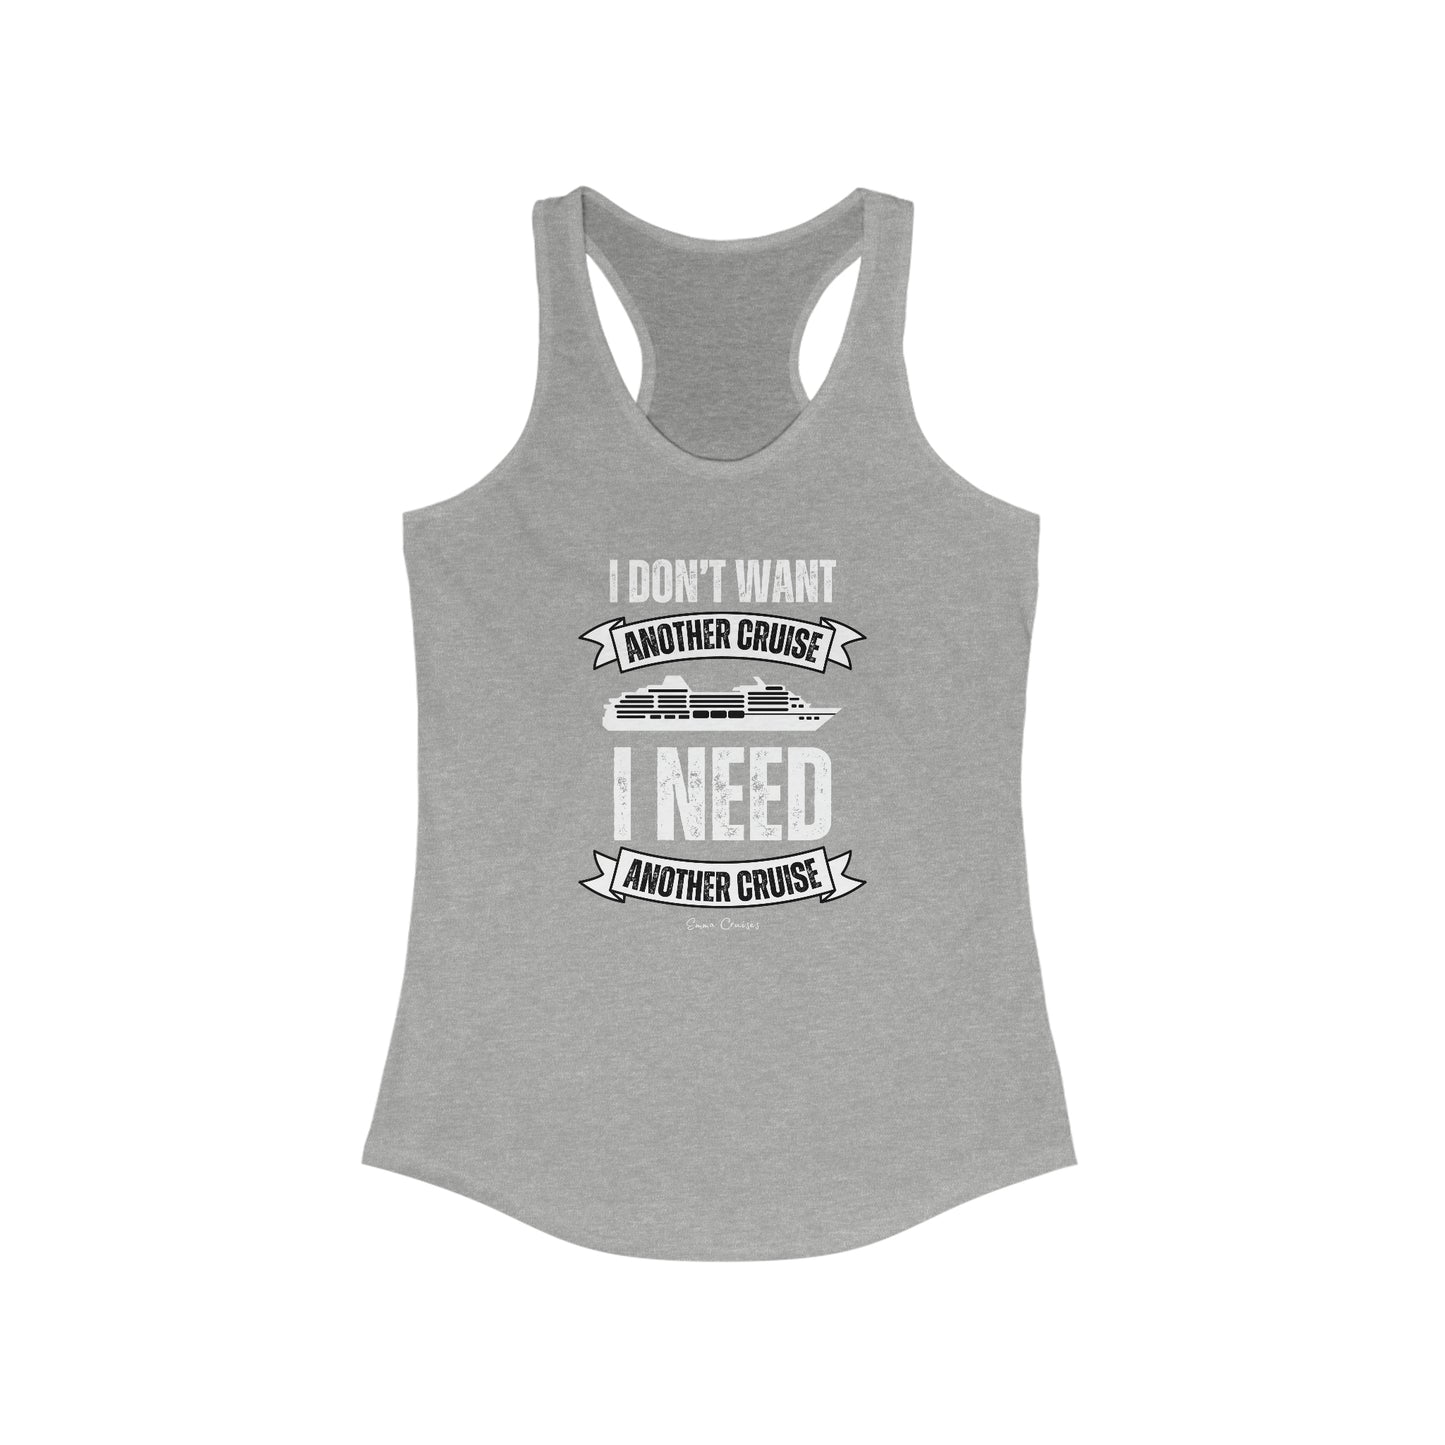 I Don't Want Another Cruise - Tank Top